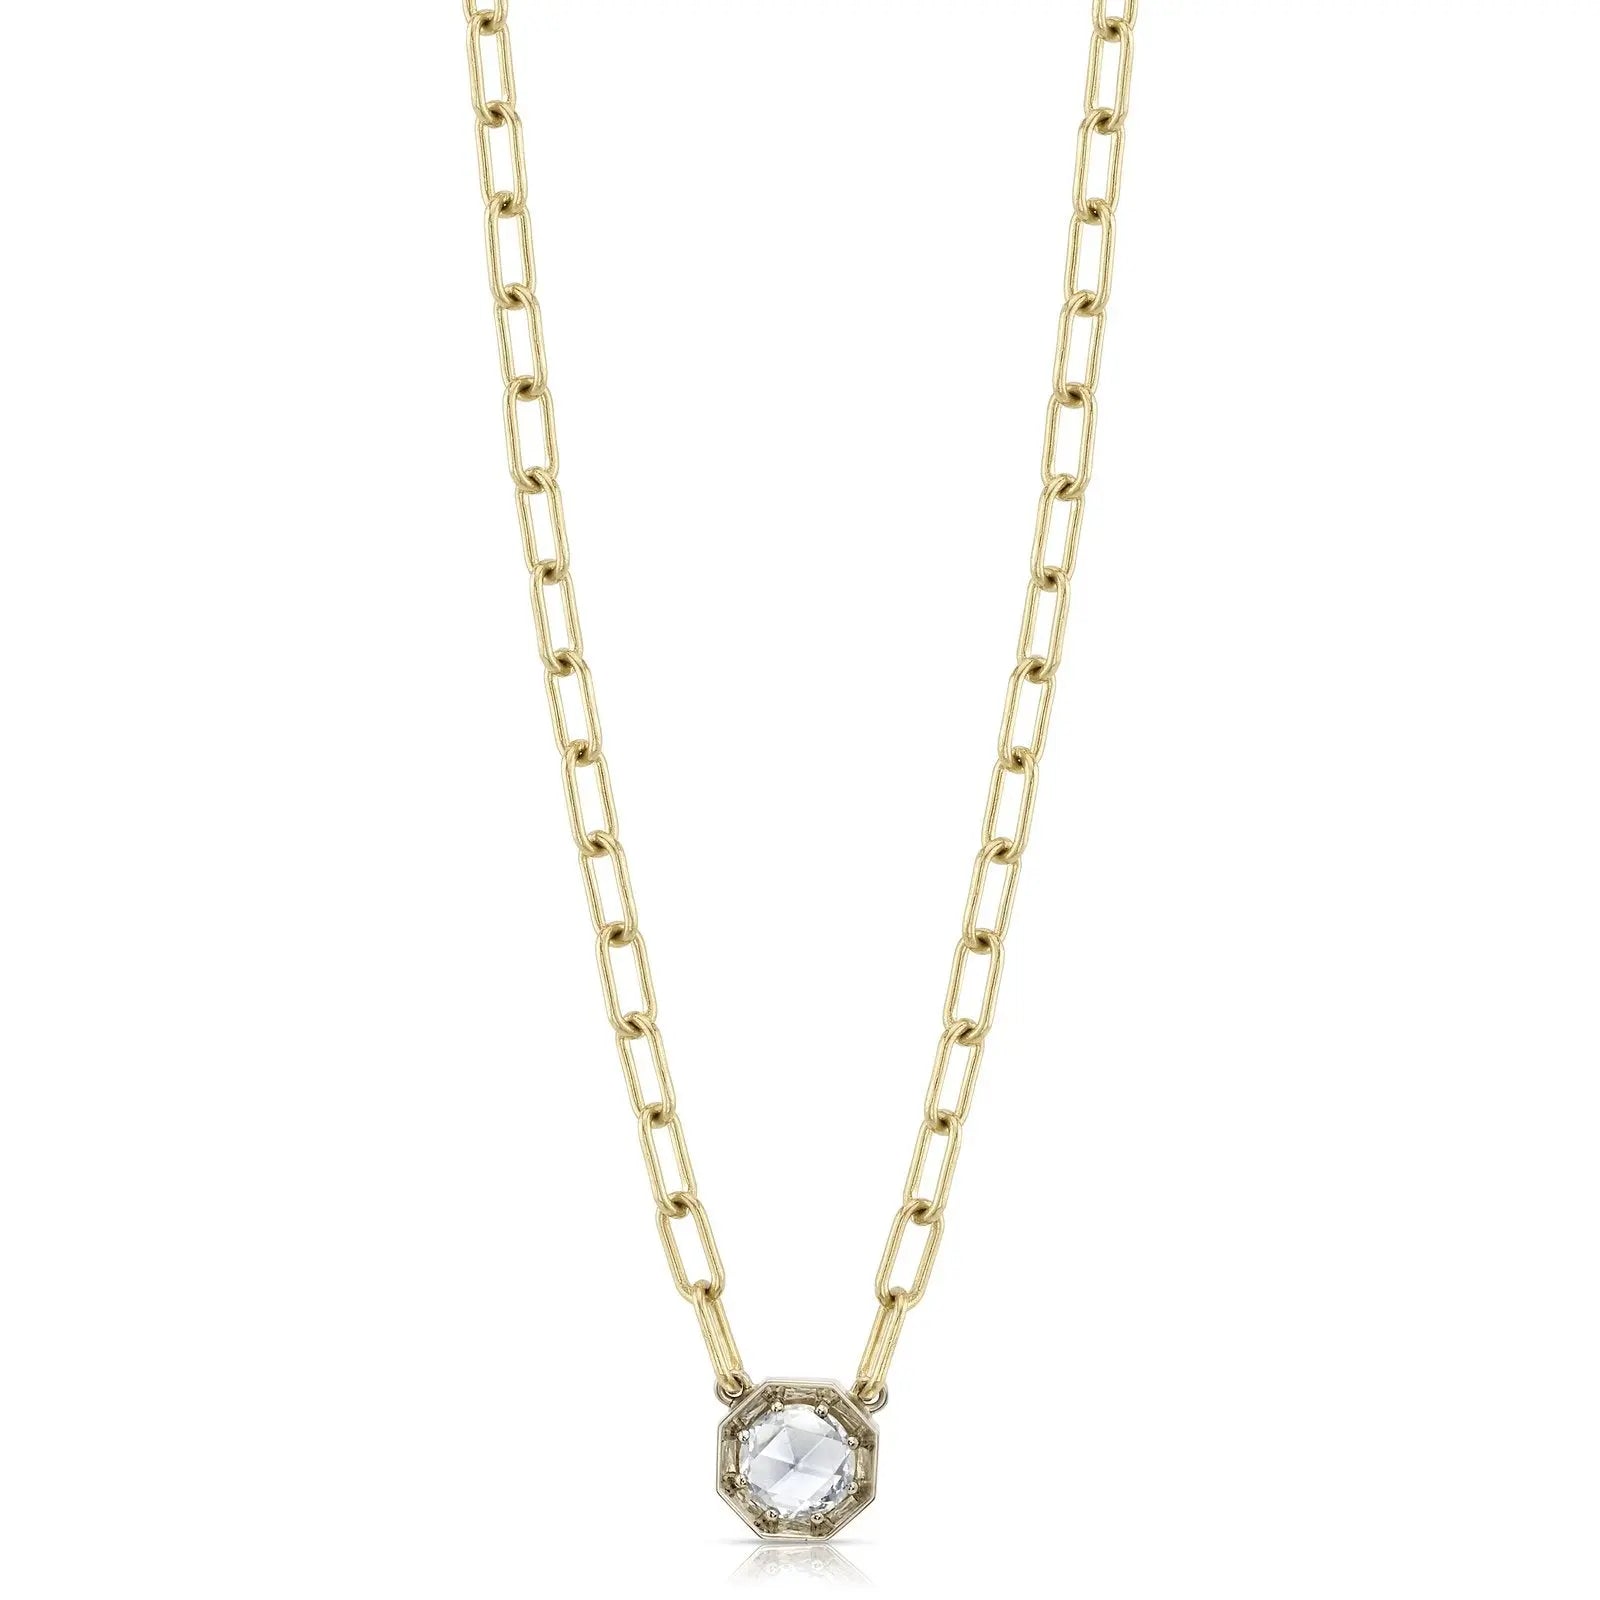 Diamond Summer Necklaces with .68 ISI1  GIA certified Rose cut diamond set in a handcrafted 18K champagne gold pendant. Pendant is set on a handcrafted 18K yellow gold bond chain.  Necklace measures 17".  Designed by Single Stone